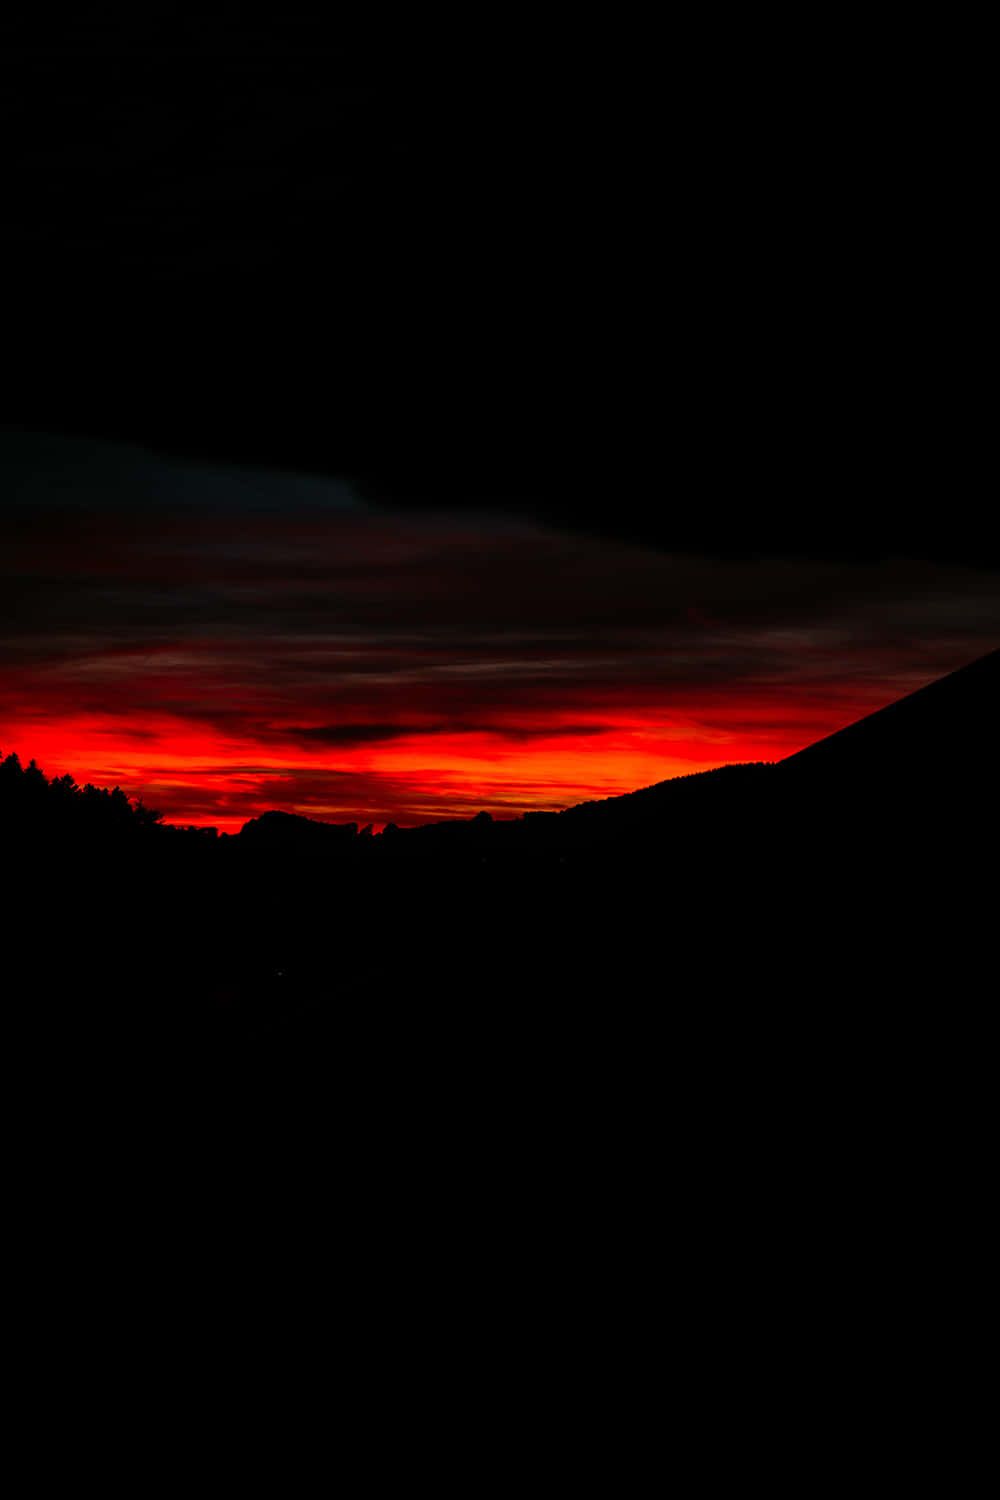 A red sunset over the mountains - Dark red